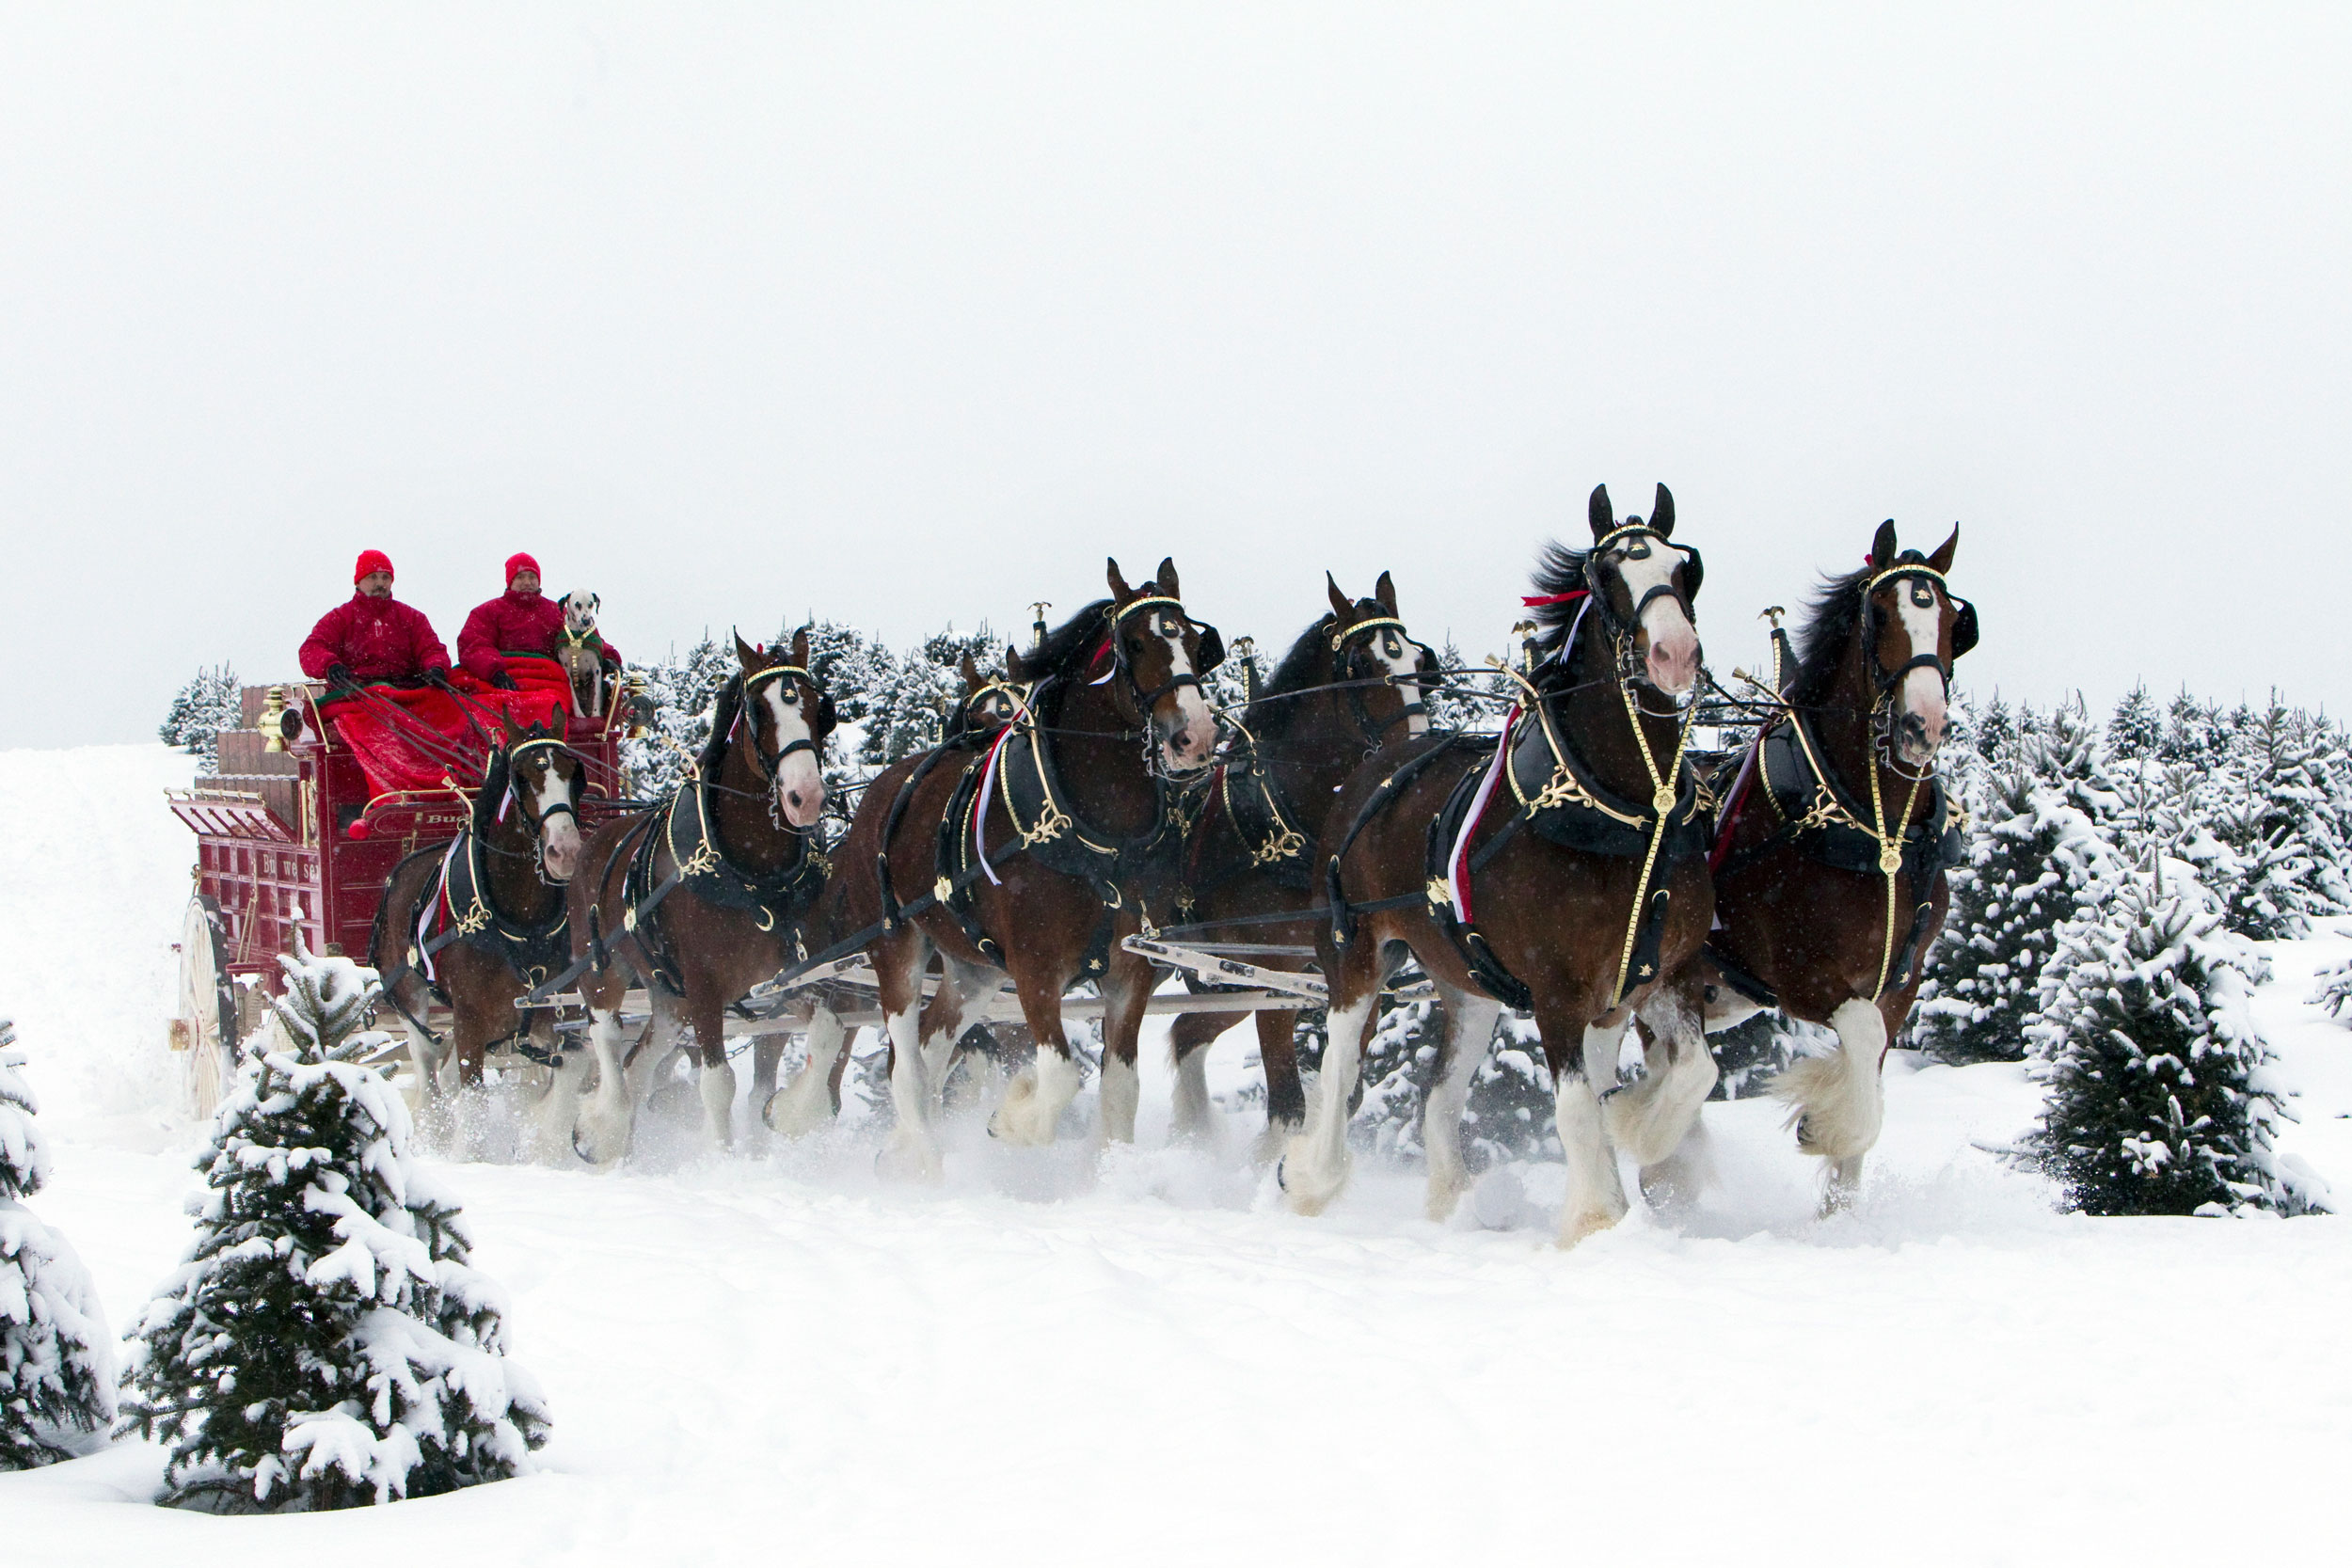 Budweiser Clydesdales In The Snow Simply Marvelous Horse World